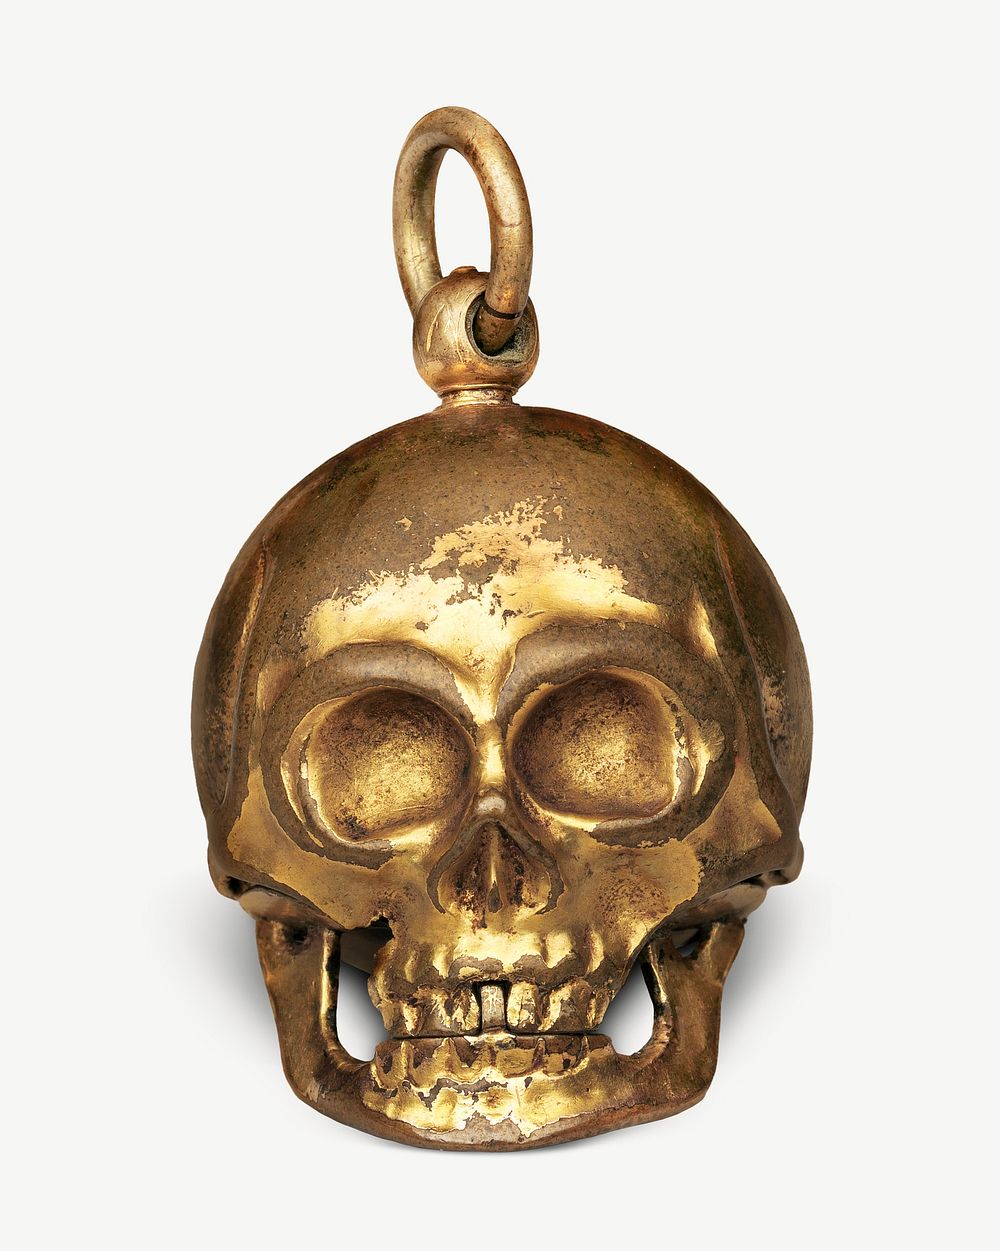 Gold skull, vintage object illustration psd. Remixed by rawpixel.